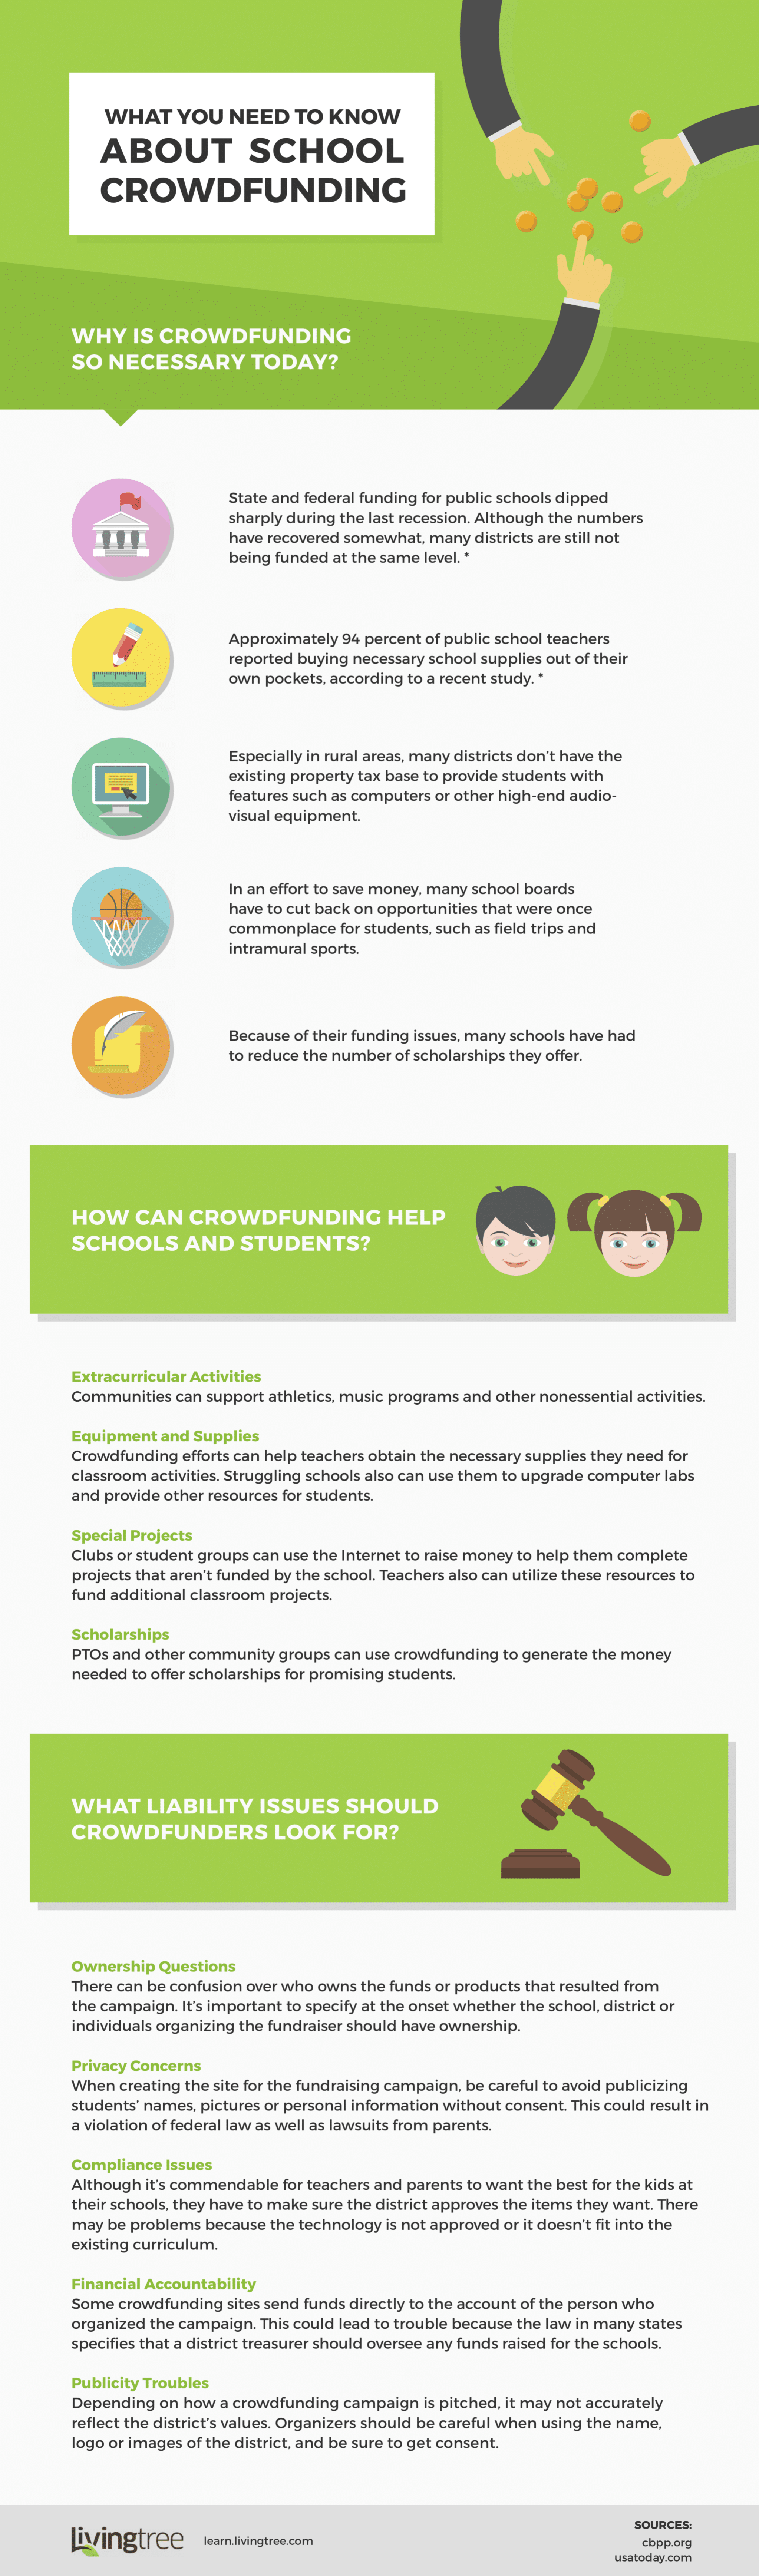 What You Need To Know About School Crowdfunding-Infographic